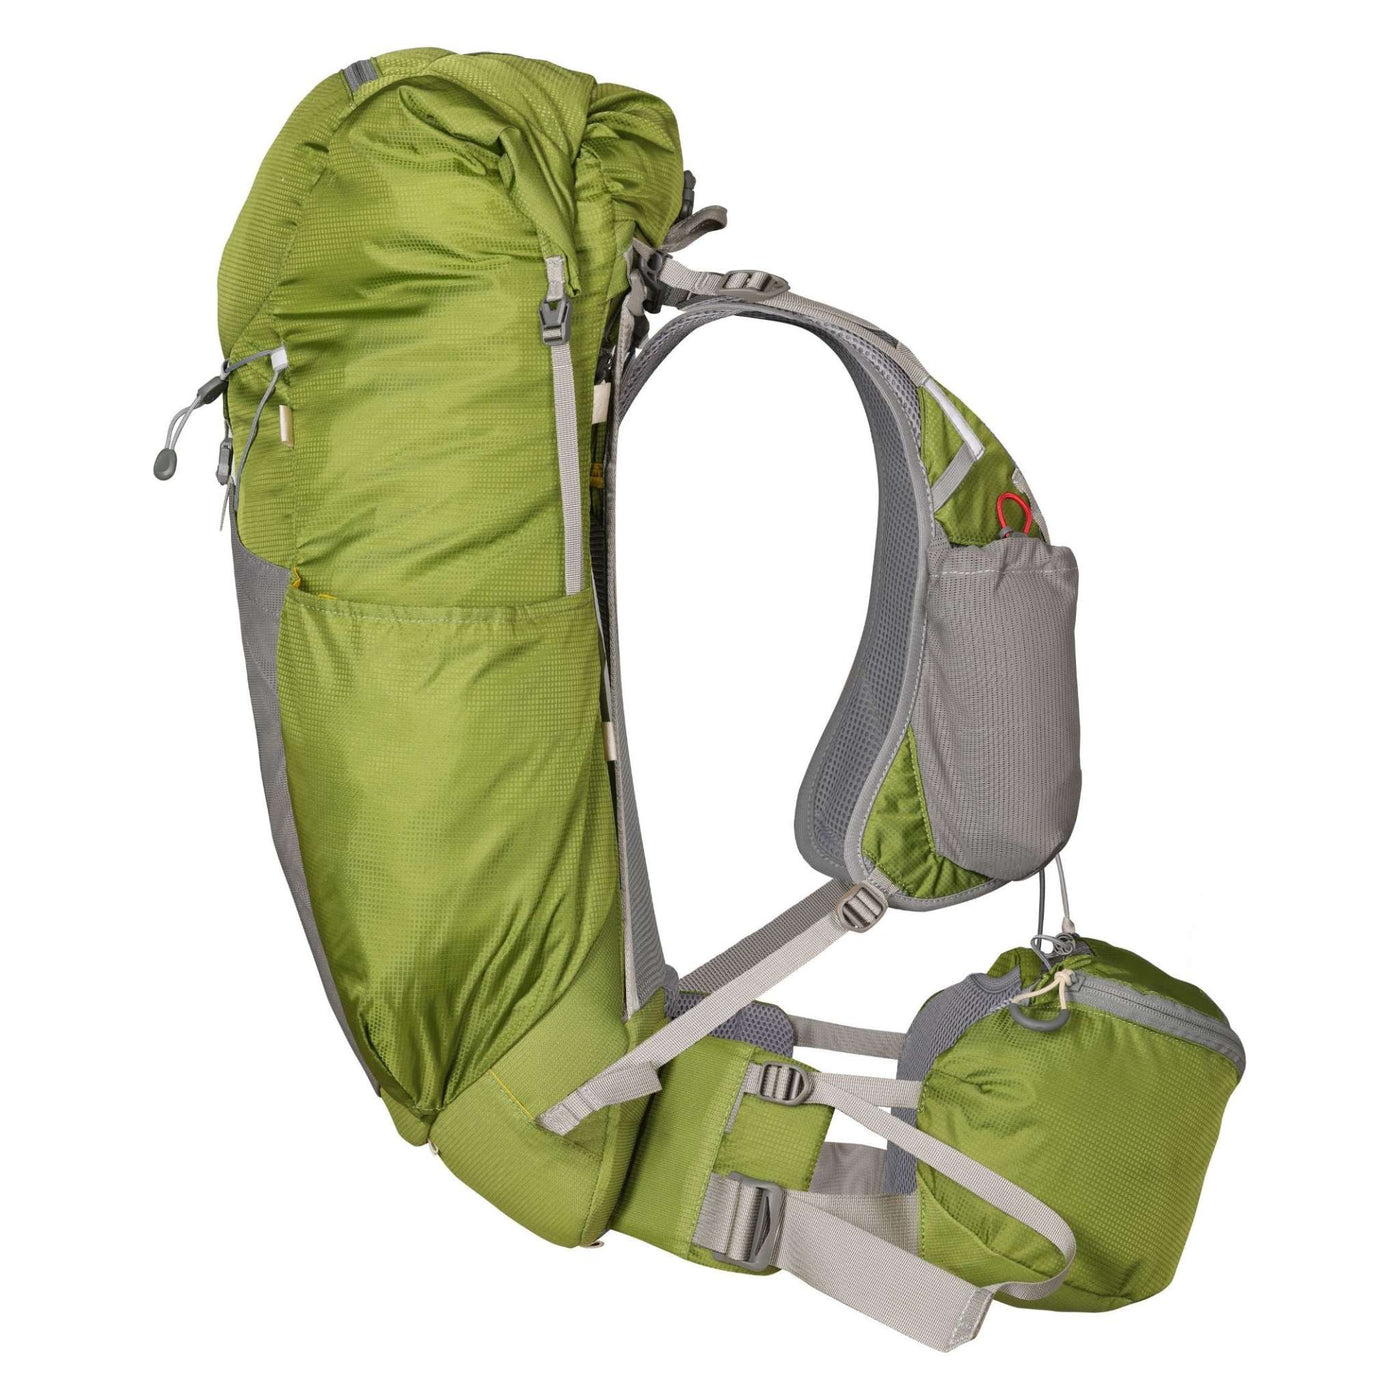 Aarn Pace Magic 40 | Aarn Hiking & Day Packs | Further Faster Christchurch NZ - 40L